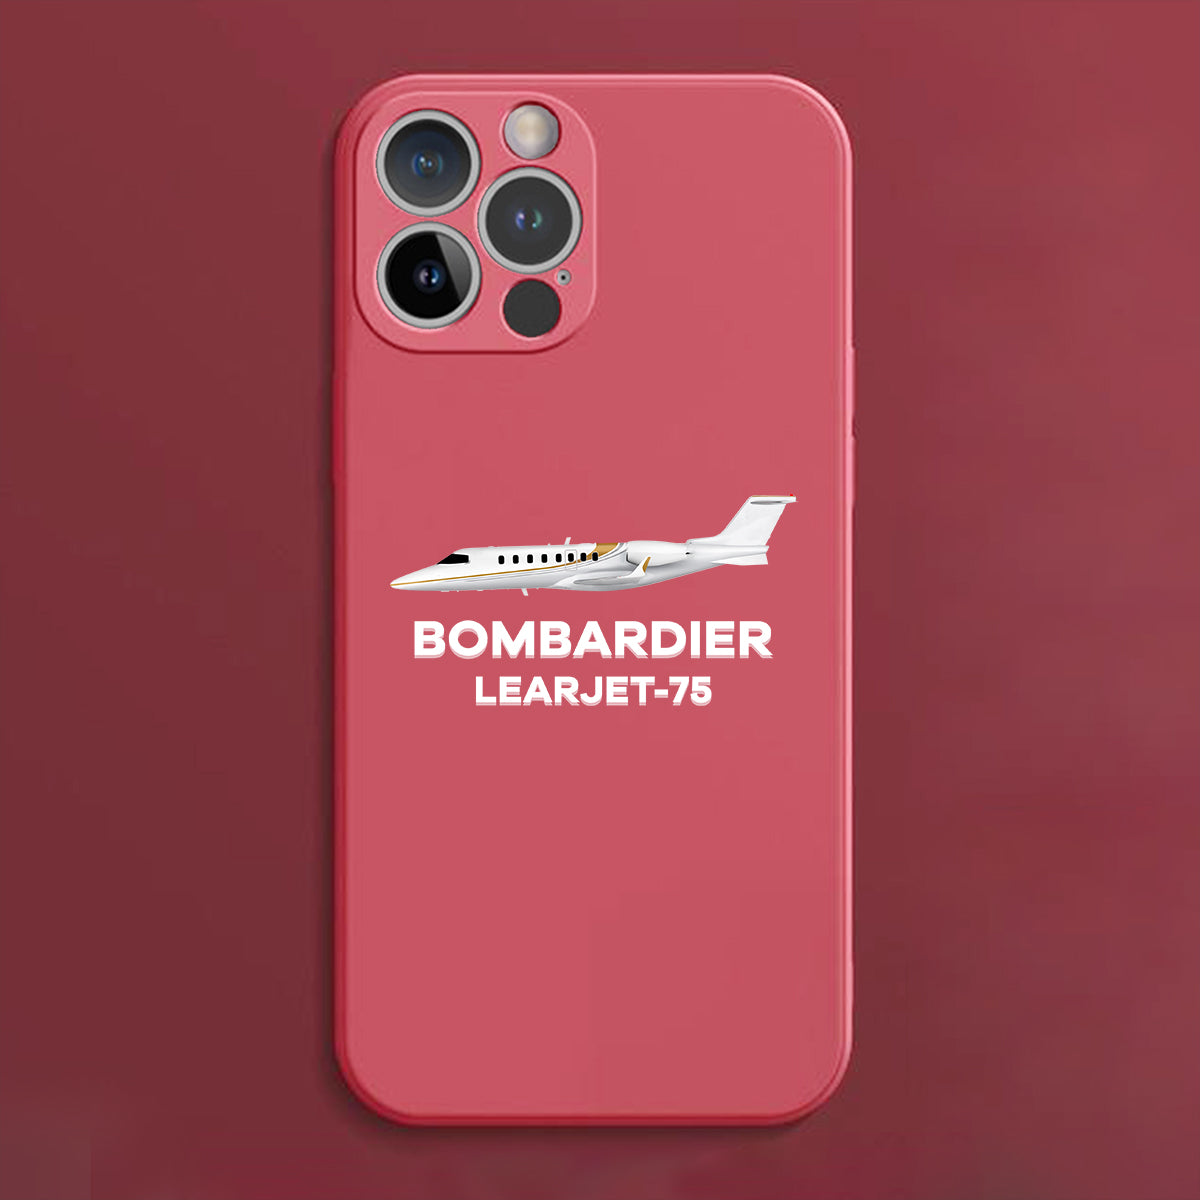 The Bombardier Learjet 75 Designed Soft Silicone iPhone Cases